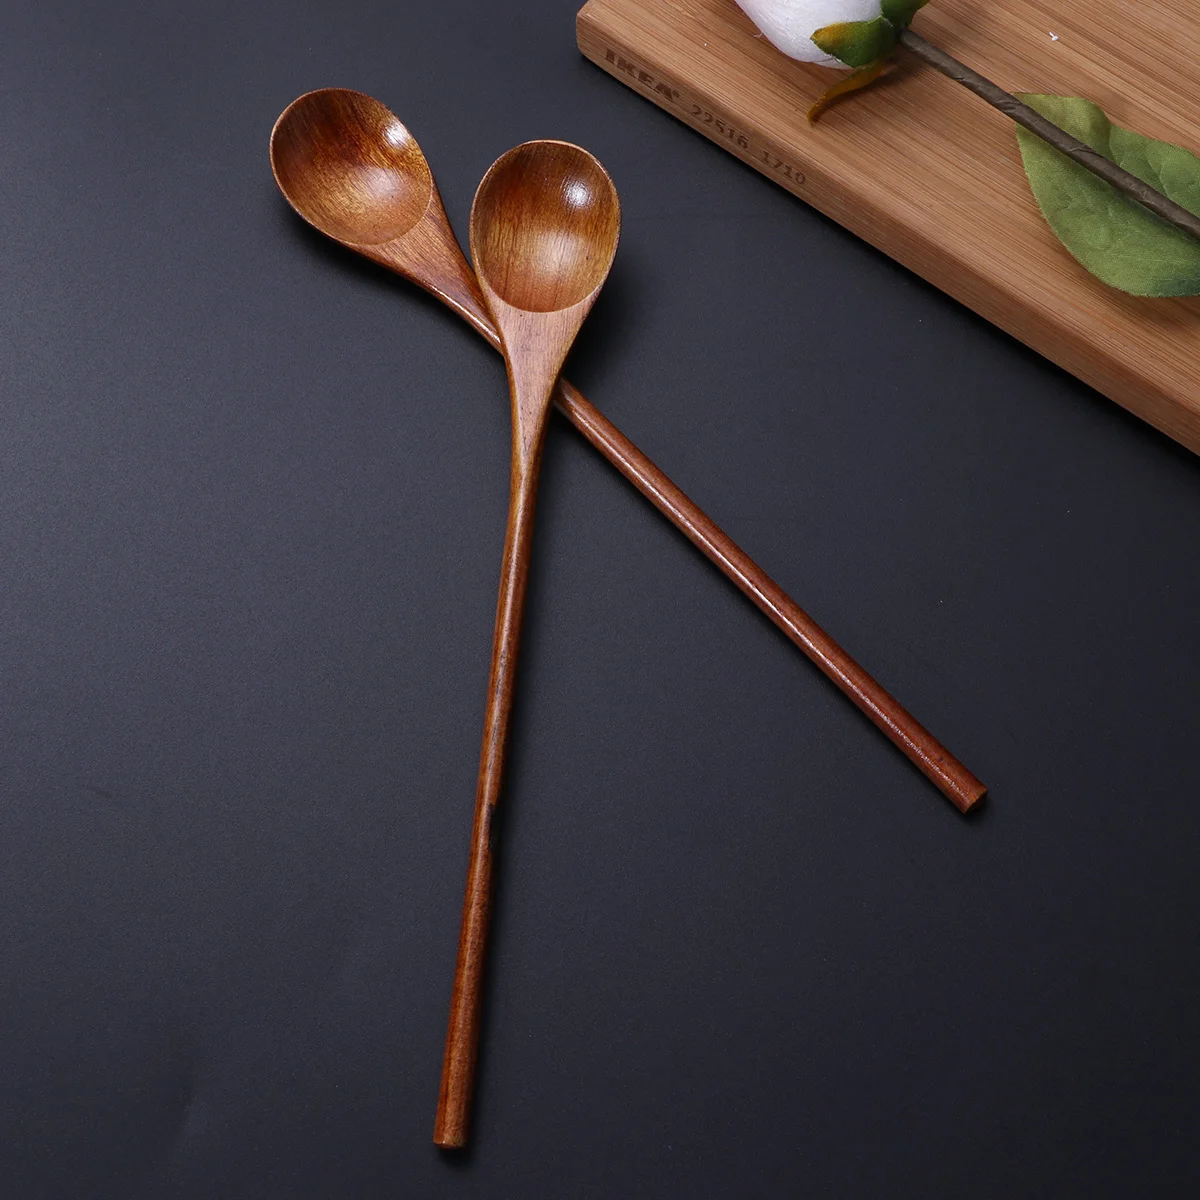 

3 Pieces Eco Friendly Natural Wooden Spoon Set for Eating Mixing Stirring Cooking Coffee Demitasse Tea Dessert